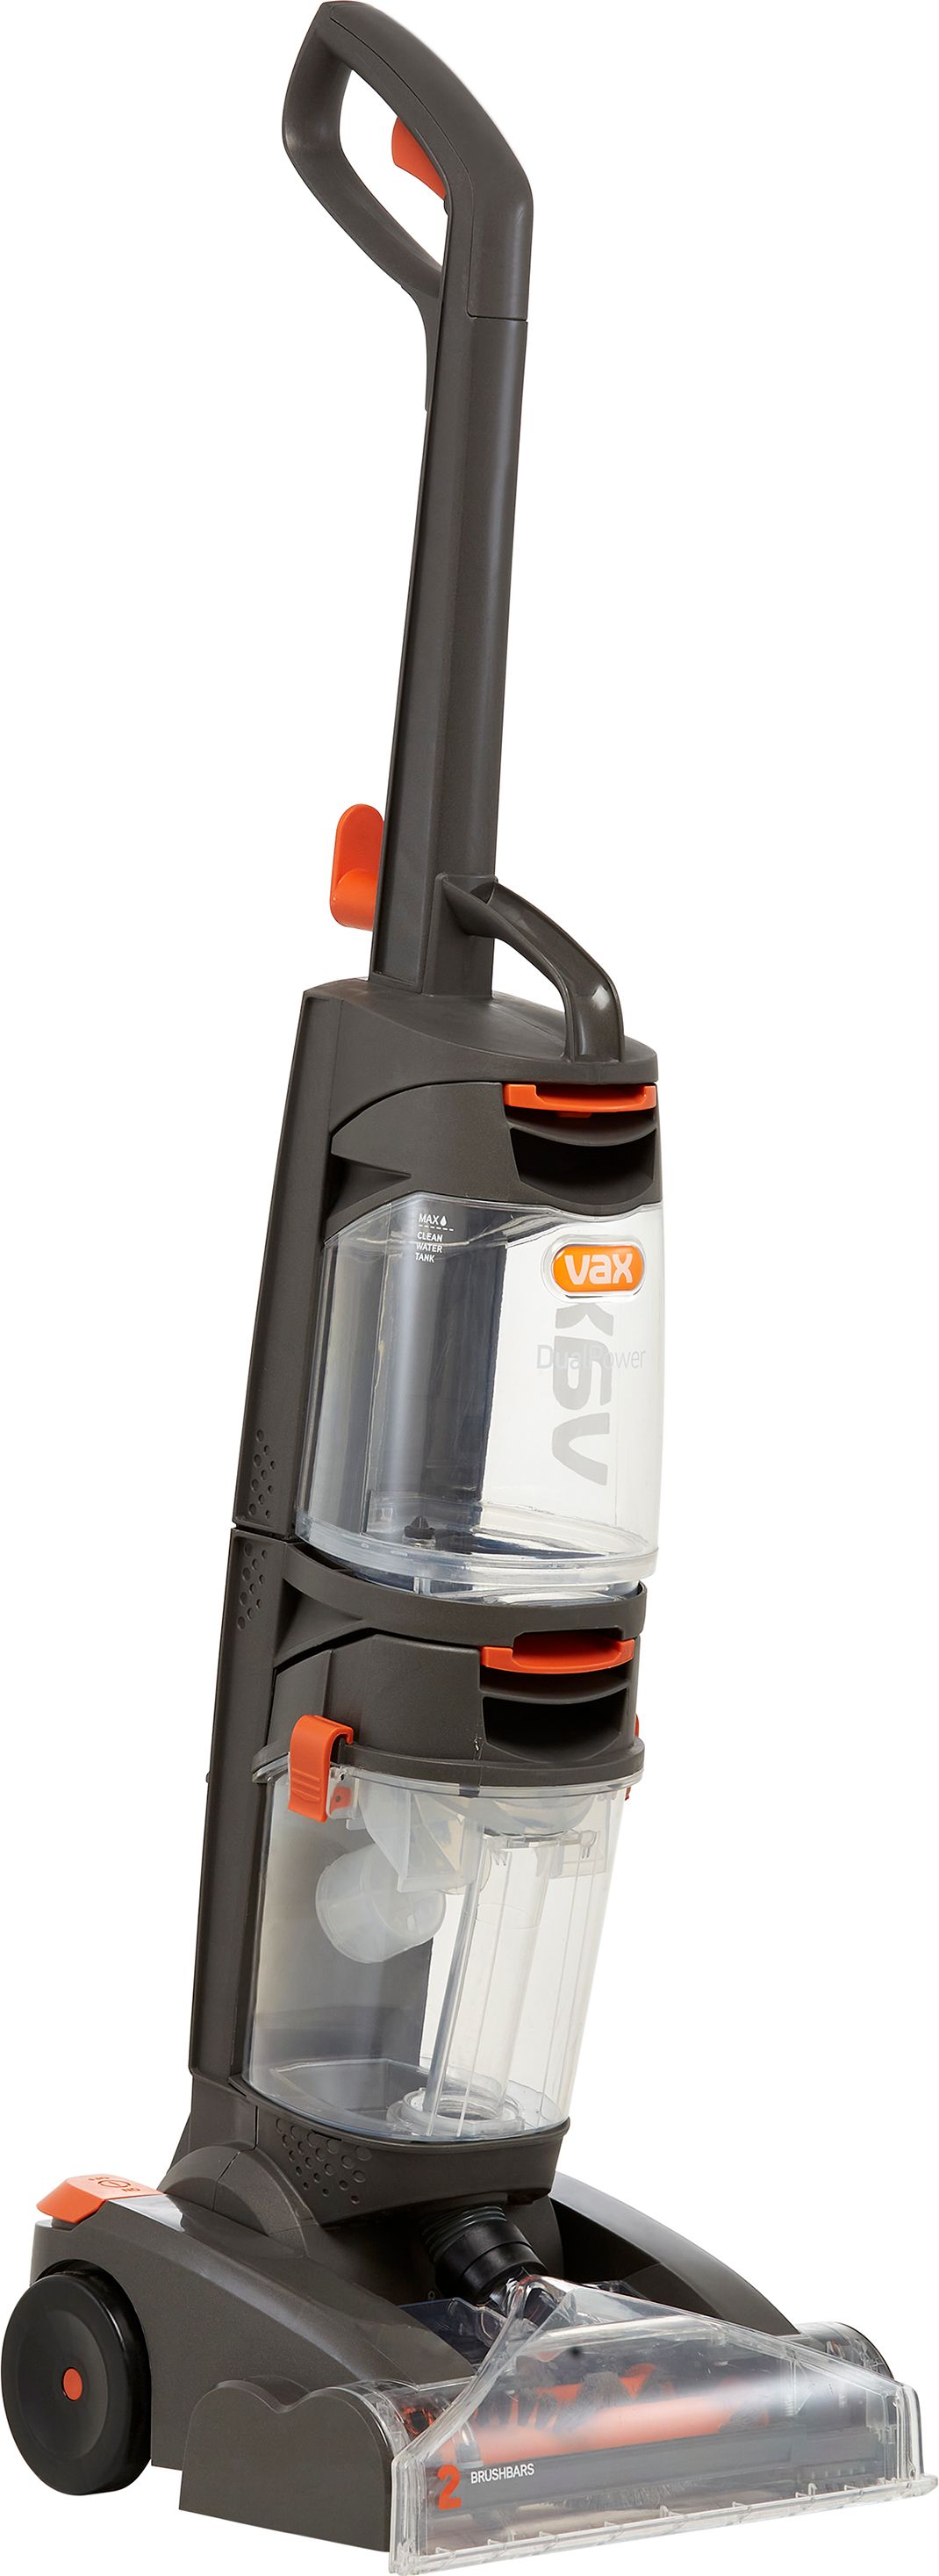 Vax Compact Power Carpet Washer Grey, 47% OFF